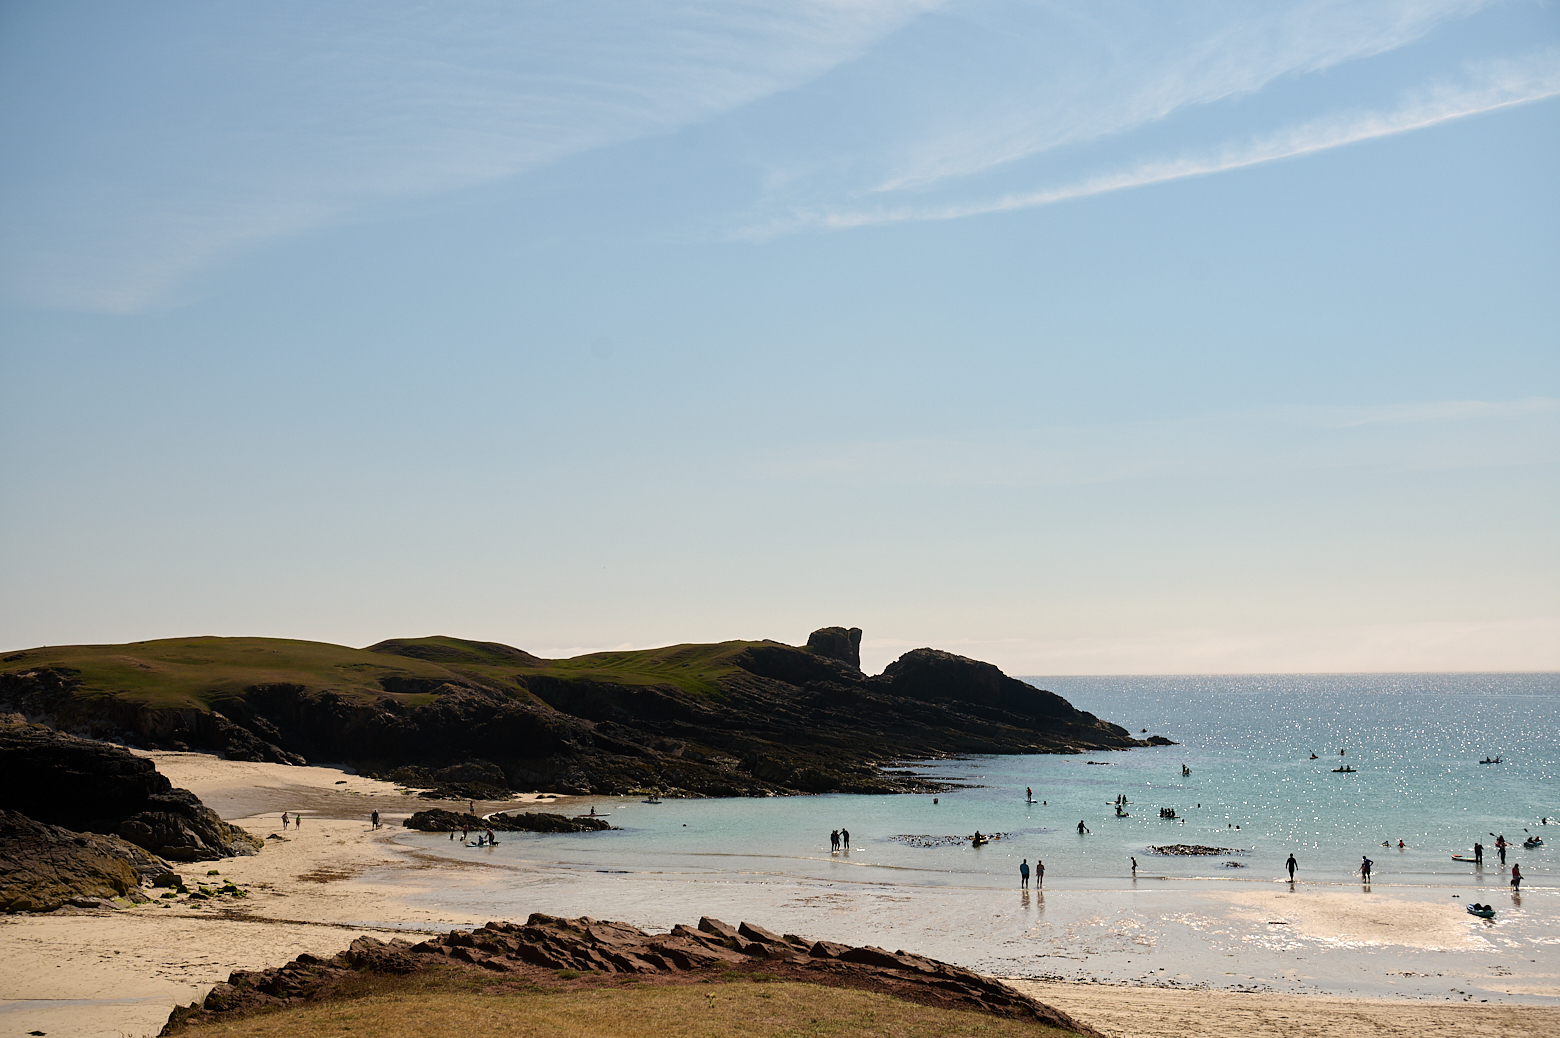 Clachtoll and Achnaird beach in Assynt, the Scottish Highlands during a heat wave.